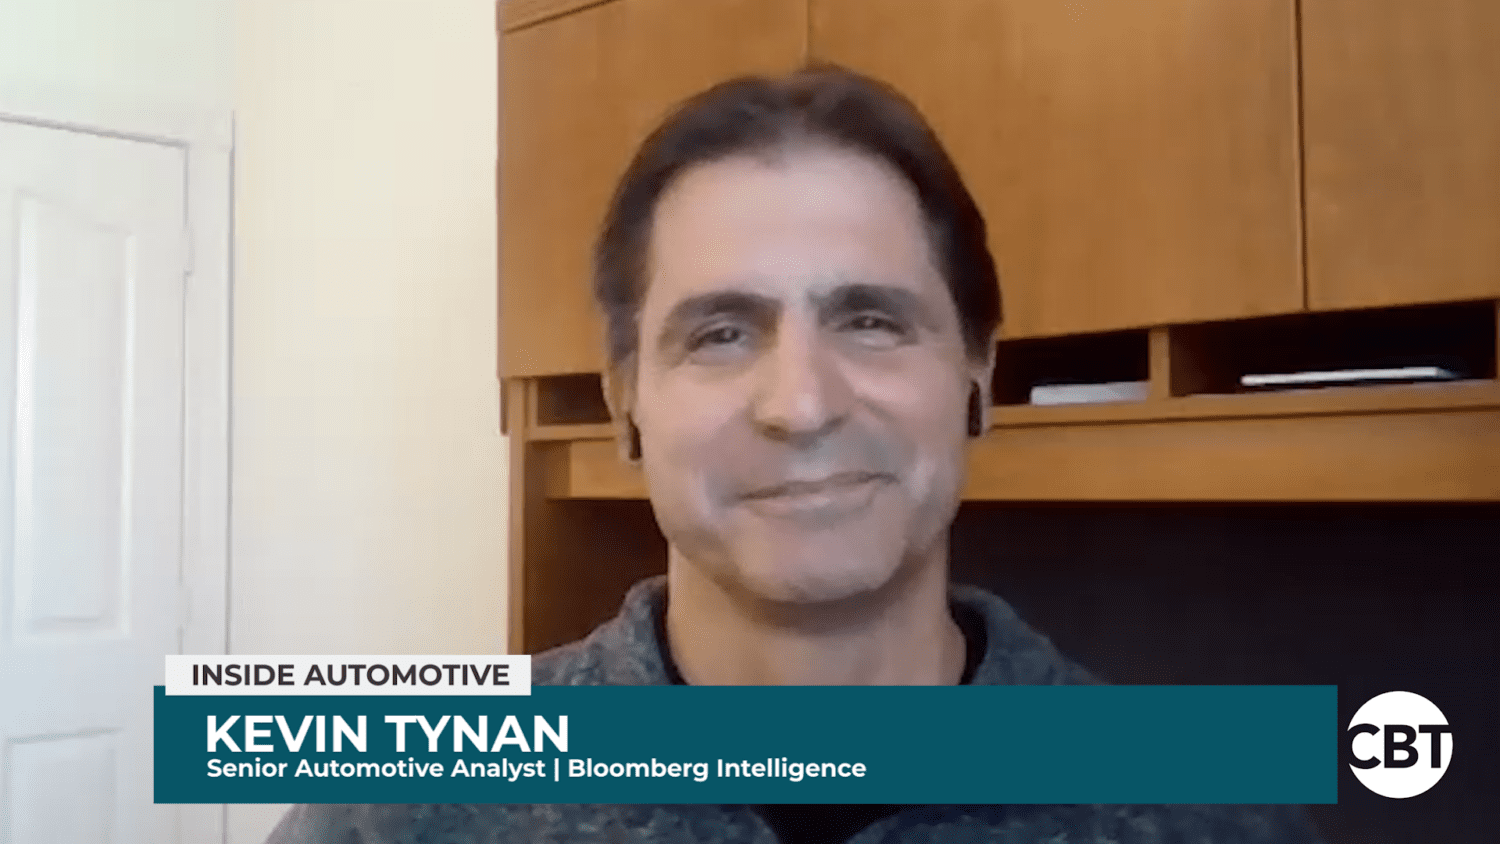 Kevin Tynan joins Inside Automotive to share his insights into the key automotive industry trends impacting dealers in Q2.